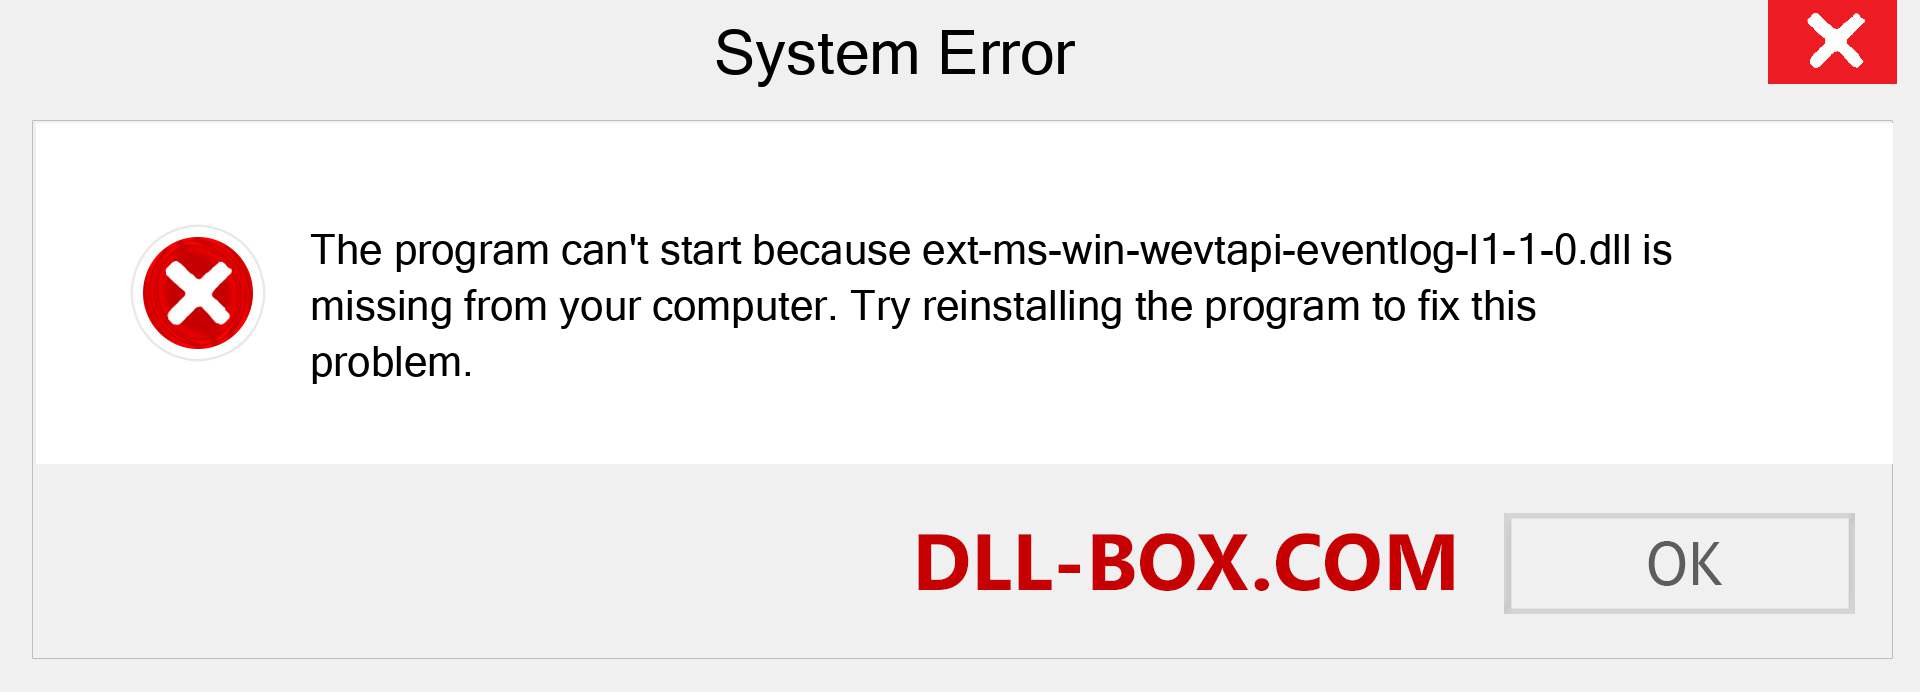  ext-ms-win-wevtapi-eventlog-l1-1-0.dll file is missing?. Download for Windows 7, 8, 10 - Fix  ext-ms-win-wevtapi-eventlog-l1-1-0 dll Missing Error on Windows, photos, images